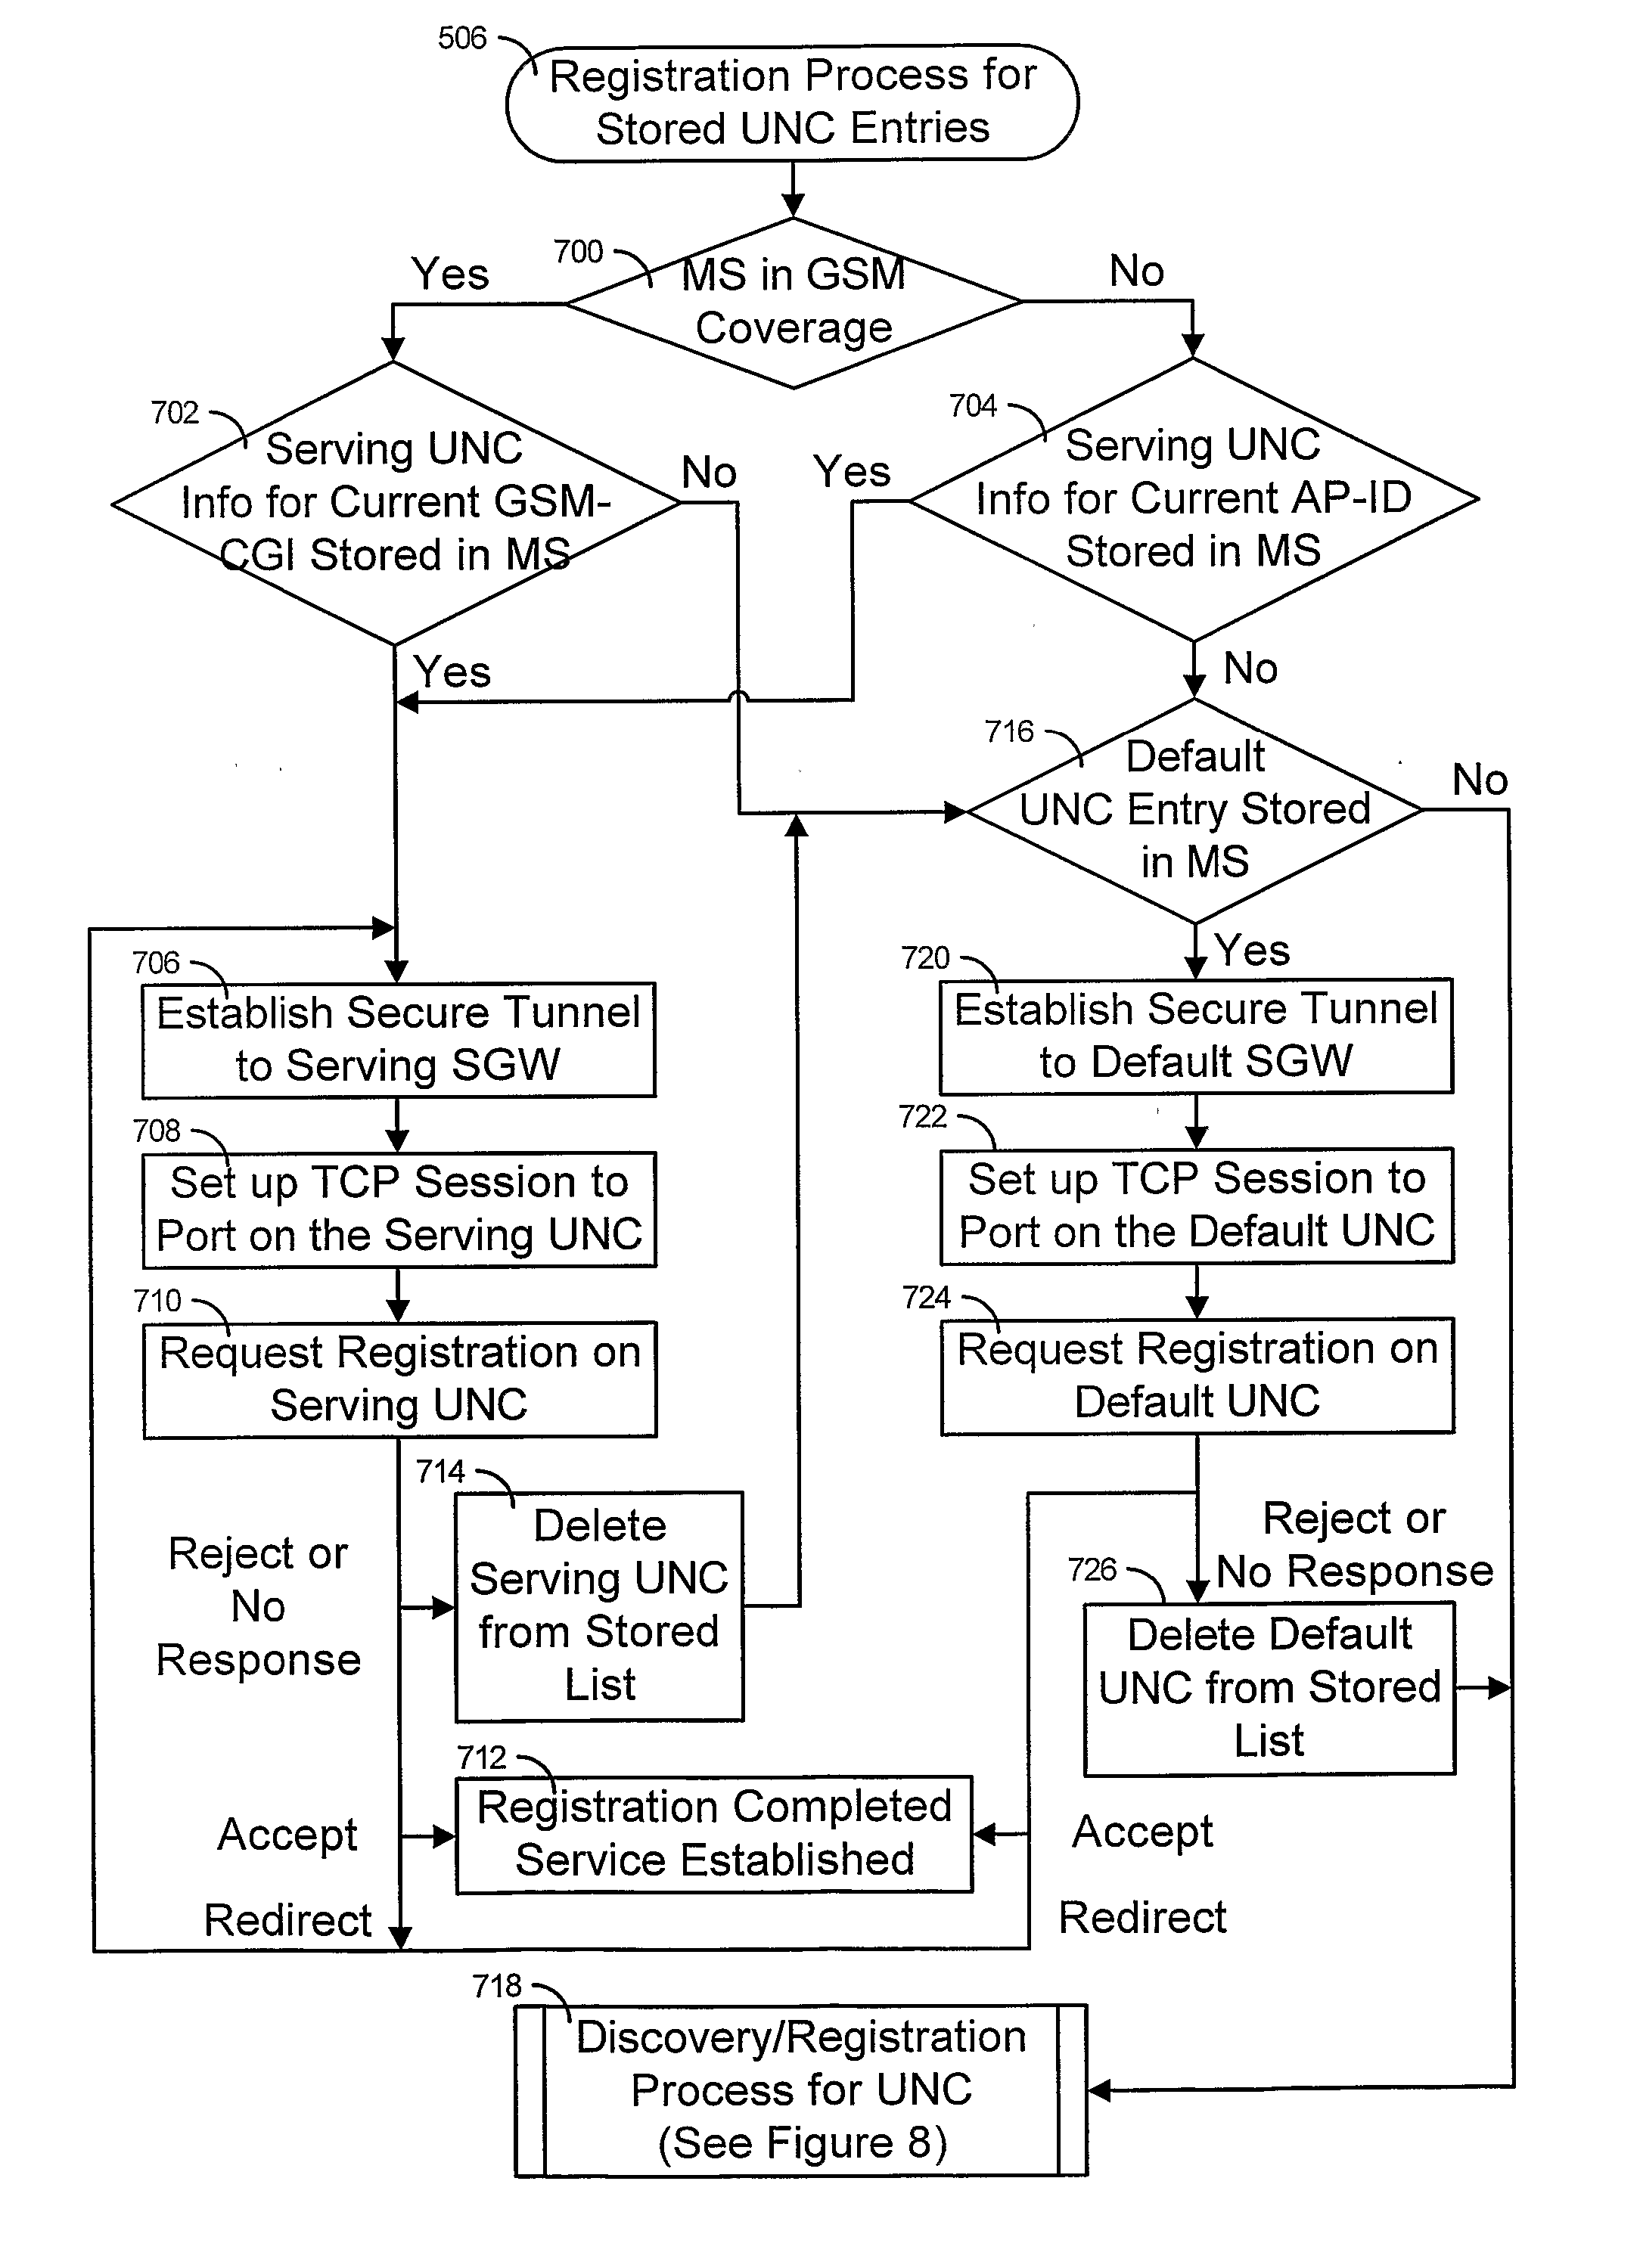 Method and System to Assign Mobile Stations to an Unlicensed Mobile Access Network Controller in an Unlicensed Radio Access Network